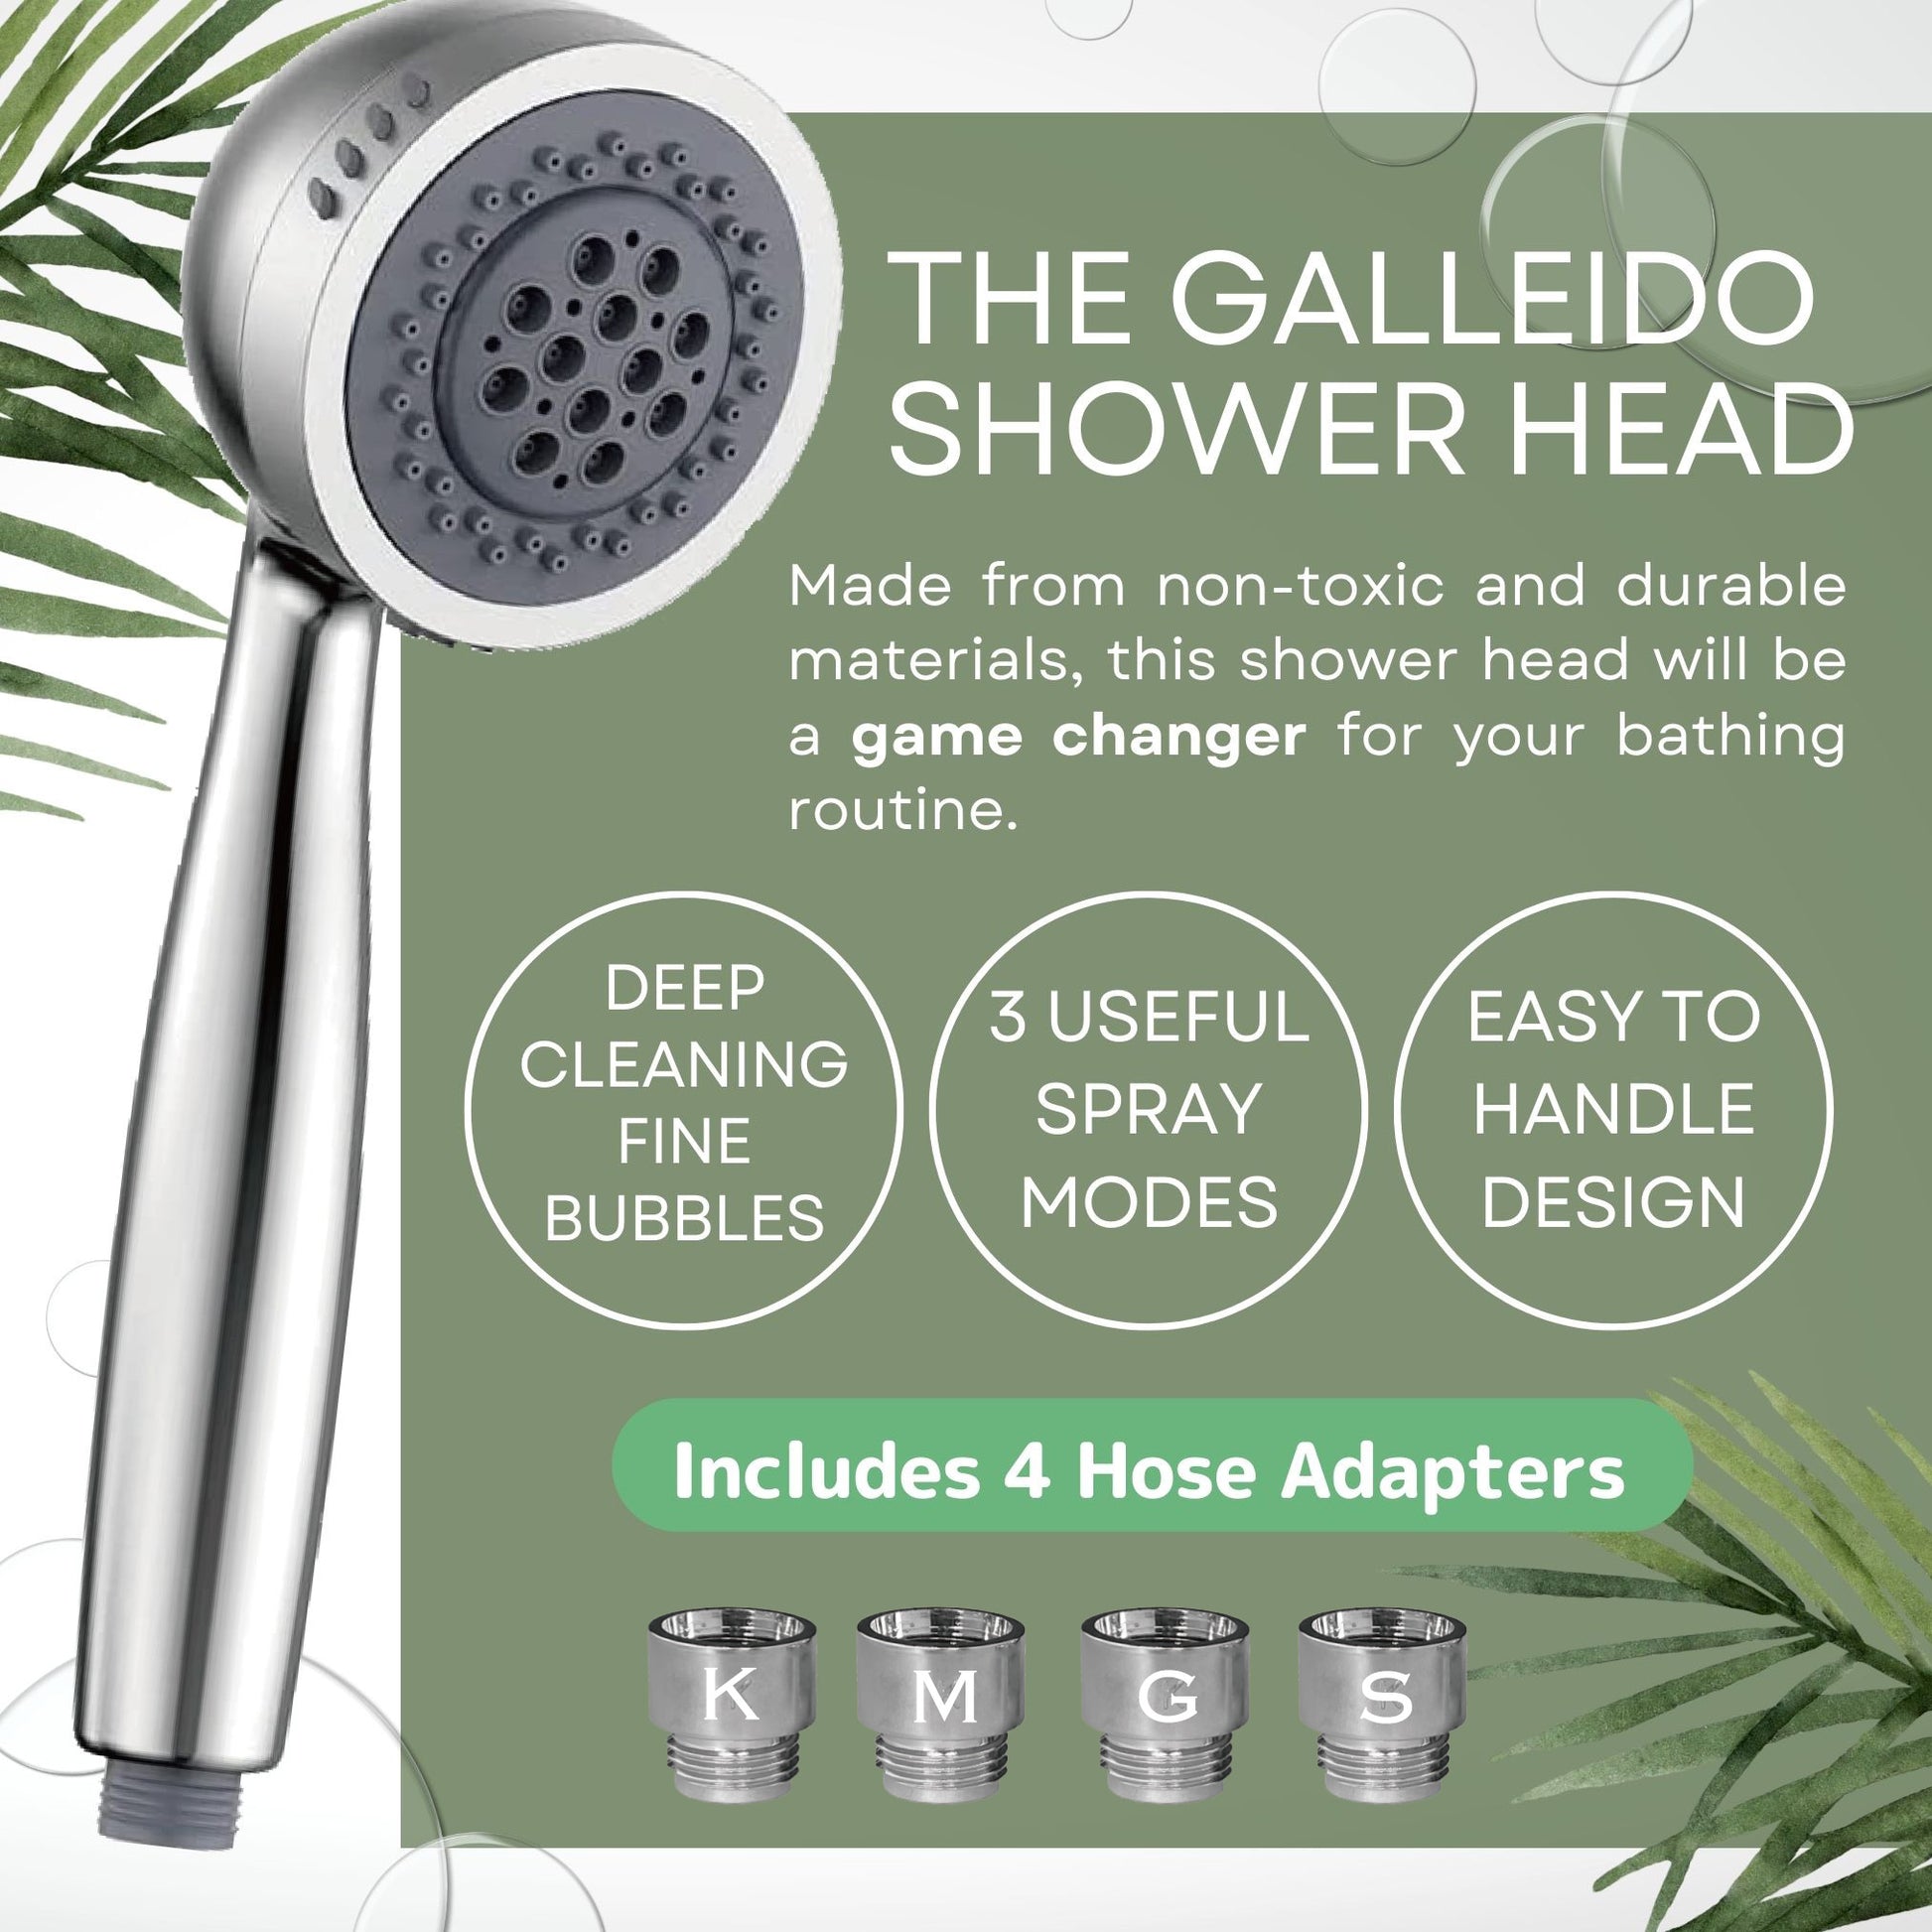 Chrome silver GALLEIDO Shower Head graphic explaining features such as the deep cleaning fine bubbles it creates, spray modes available and ergonomic handle